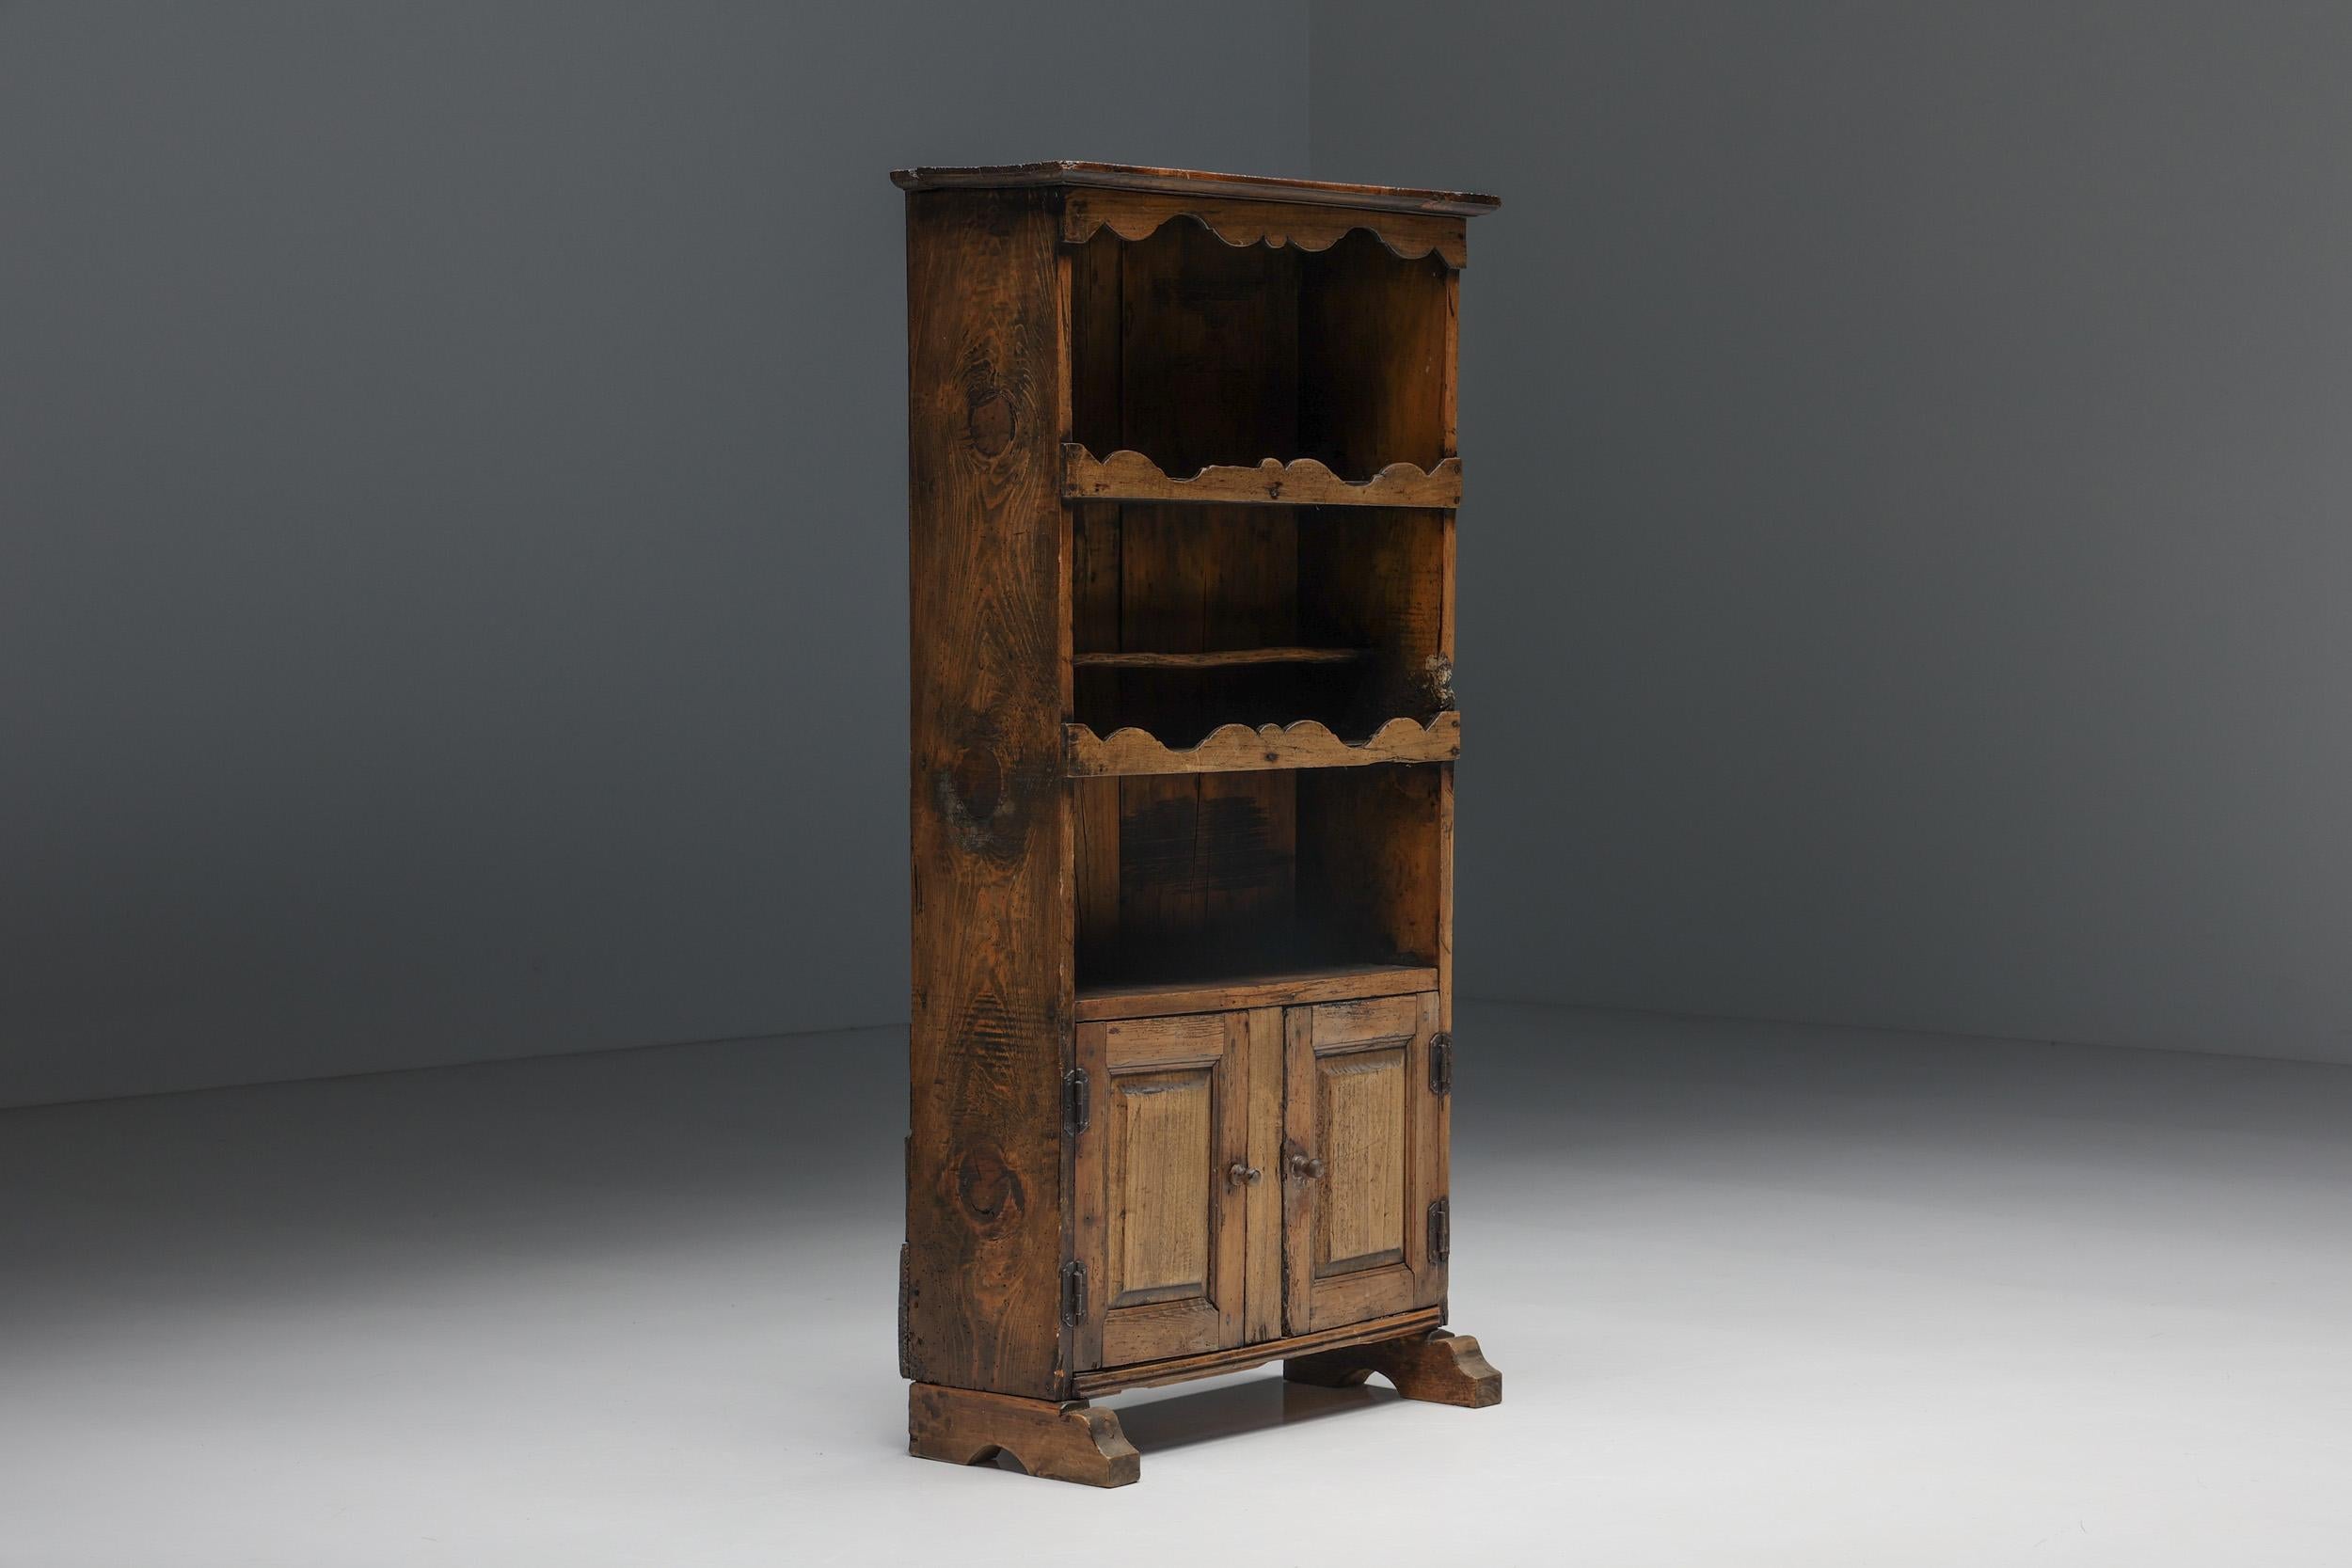 Rural; Rustic; Wabi Sabi; cupboard; Cabinet; Sideboard; Storage Space; Art Populaire; 19th Century; France; French Craftsmanship; Haute-Savoie; Breton; Auvergnat;

The upper part of this rural cupboard shows three shelves, ideal to display books,